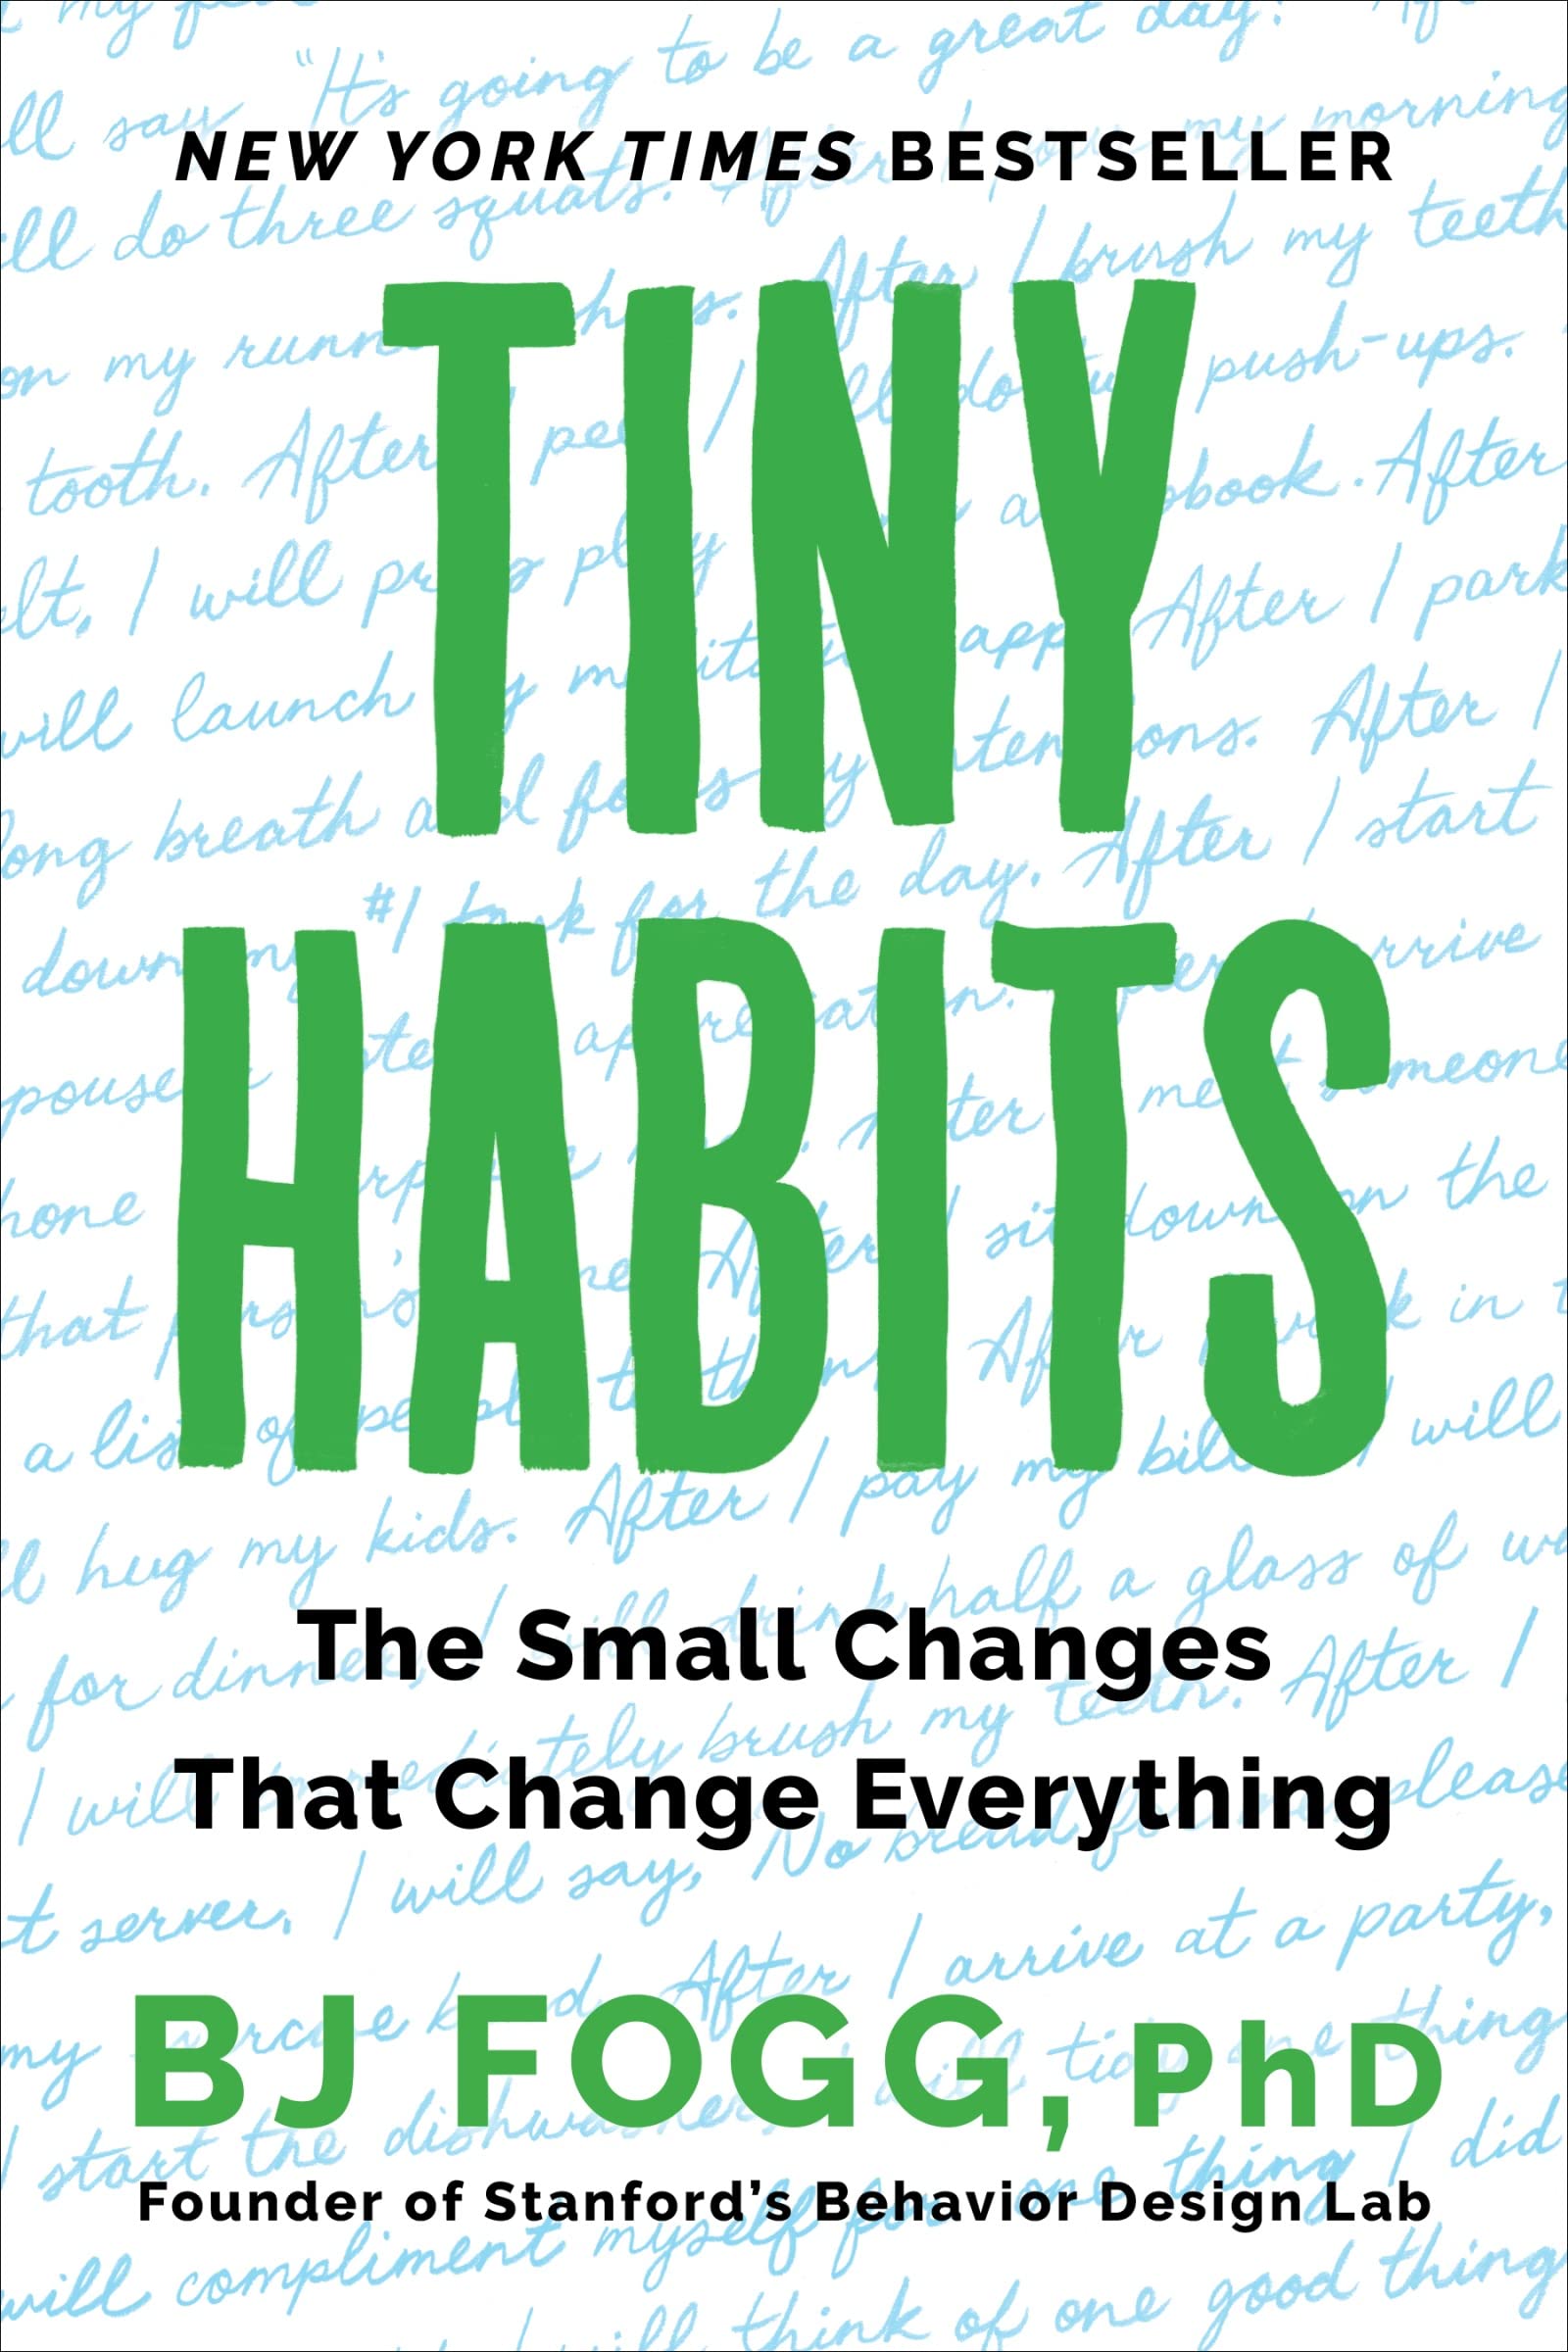 Tiny Habits: The Small Changes That Change Everything by Fogg, Bj